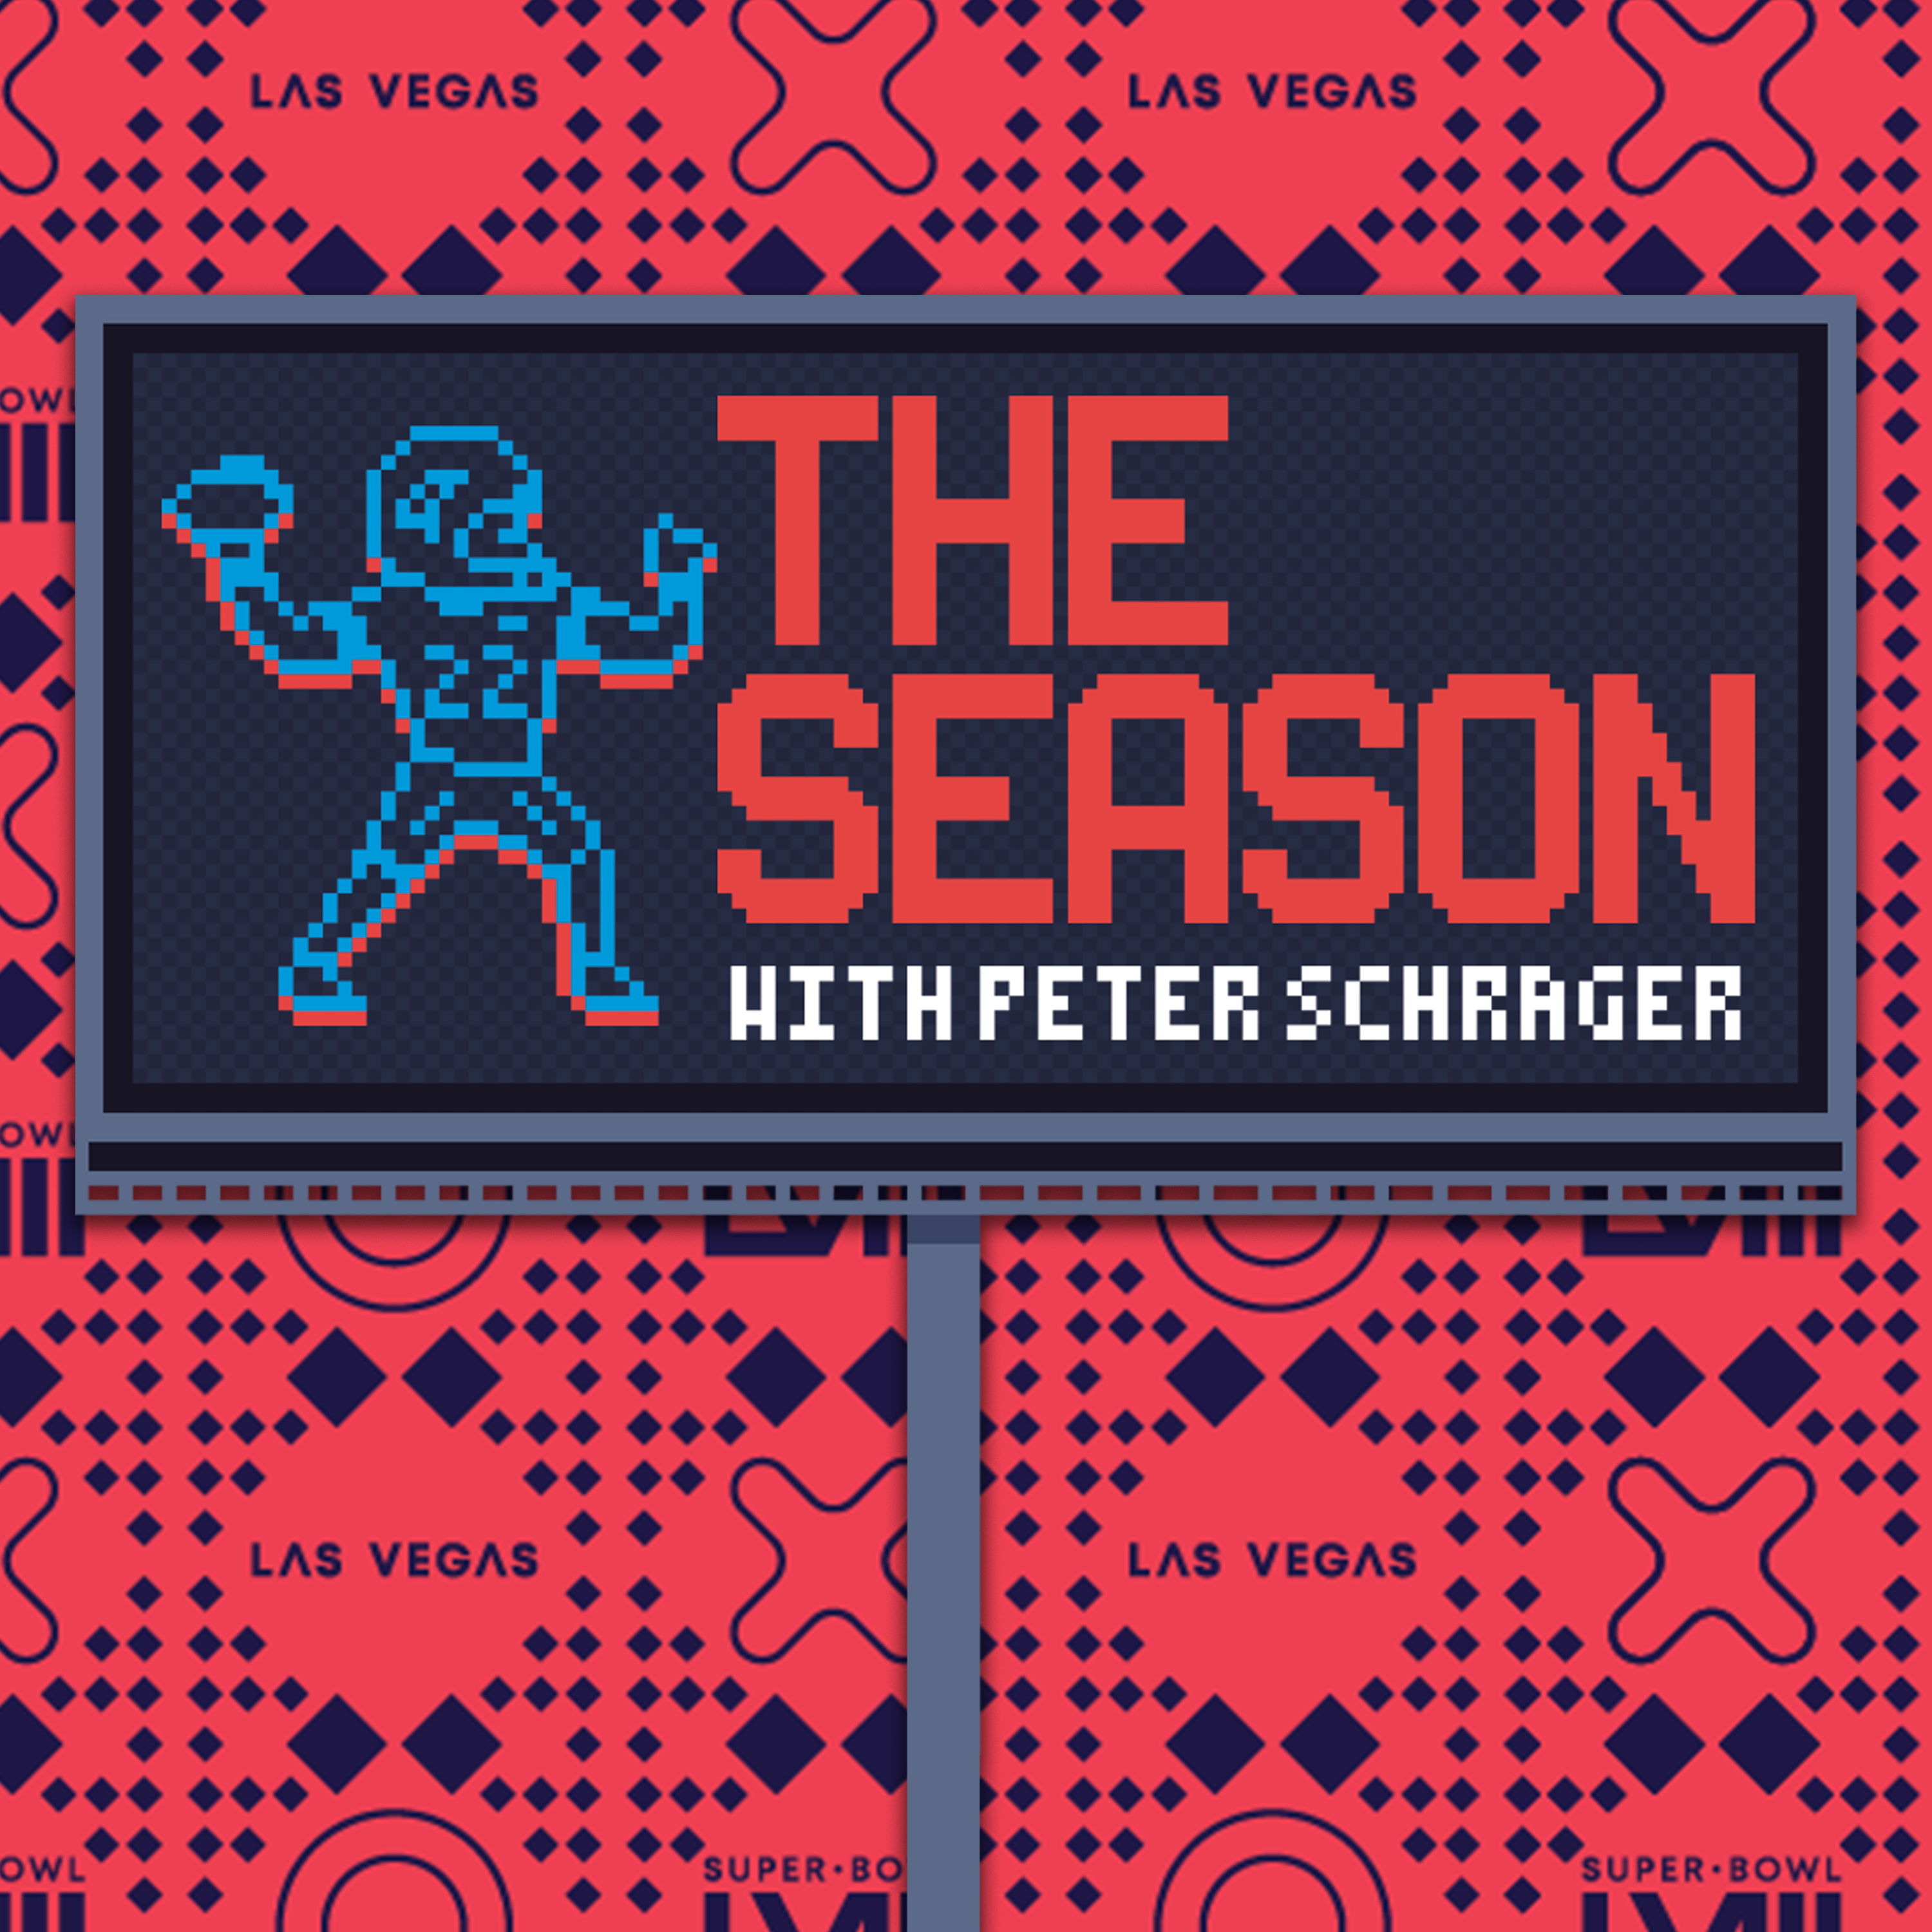 The Season with Peter Schrager: Chris ”Mad Dog” Russo and Peter’s official Super Bowl XLVIII prediction